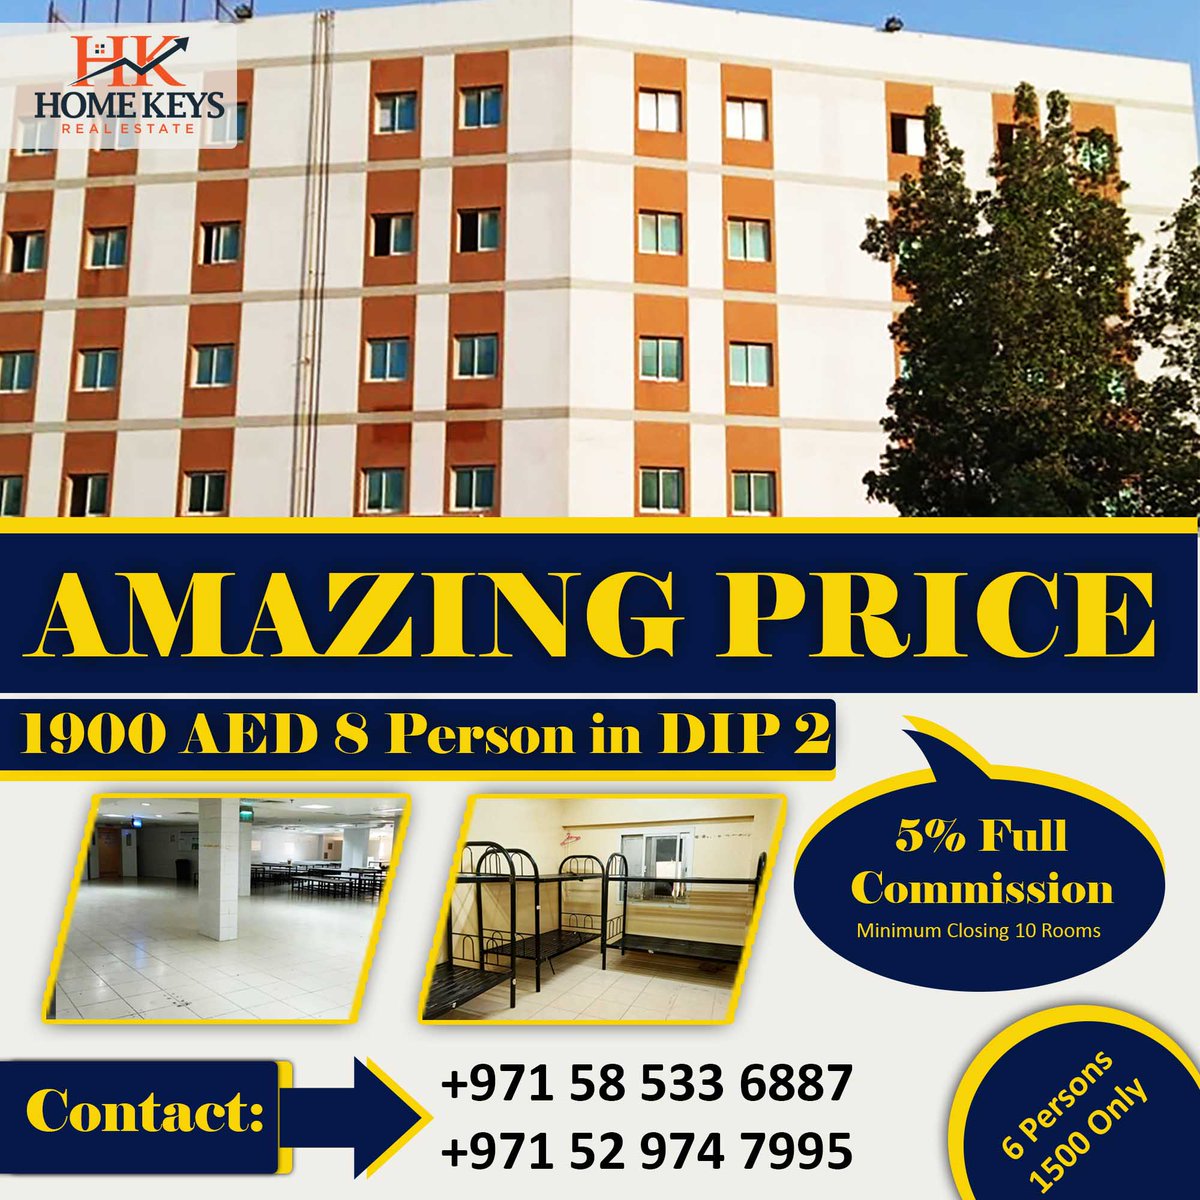 AMAZING PRICE 1900 AED 8 Person in DIP 2 | 6 Persons 1500 Only
#StaffAccommodation #LaborCamp #DIP2 #DubaiInvestmentsPark2 #WorkersAccommodation
#LabourAccommodation #DIP2Accommodation #DIP2LaborCamp #AffordableAccommodation
#ComfortableLiving #HousingSolution #WorkersHousing